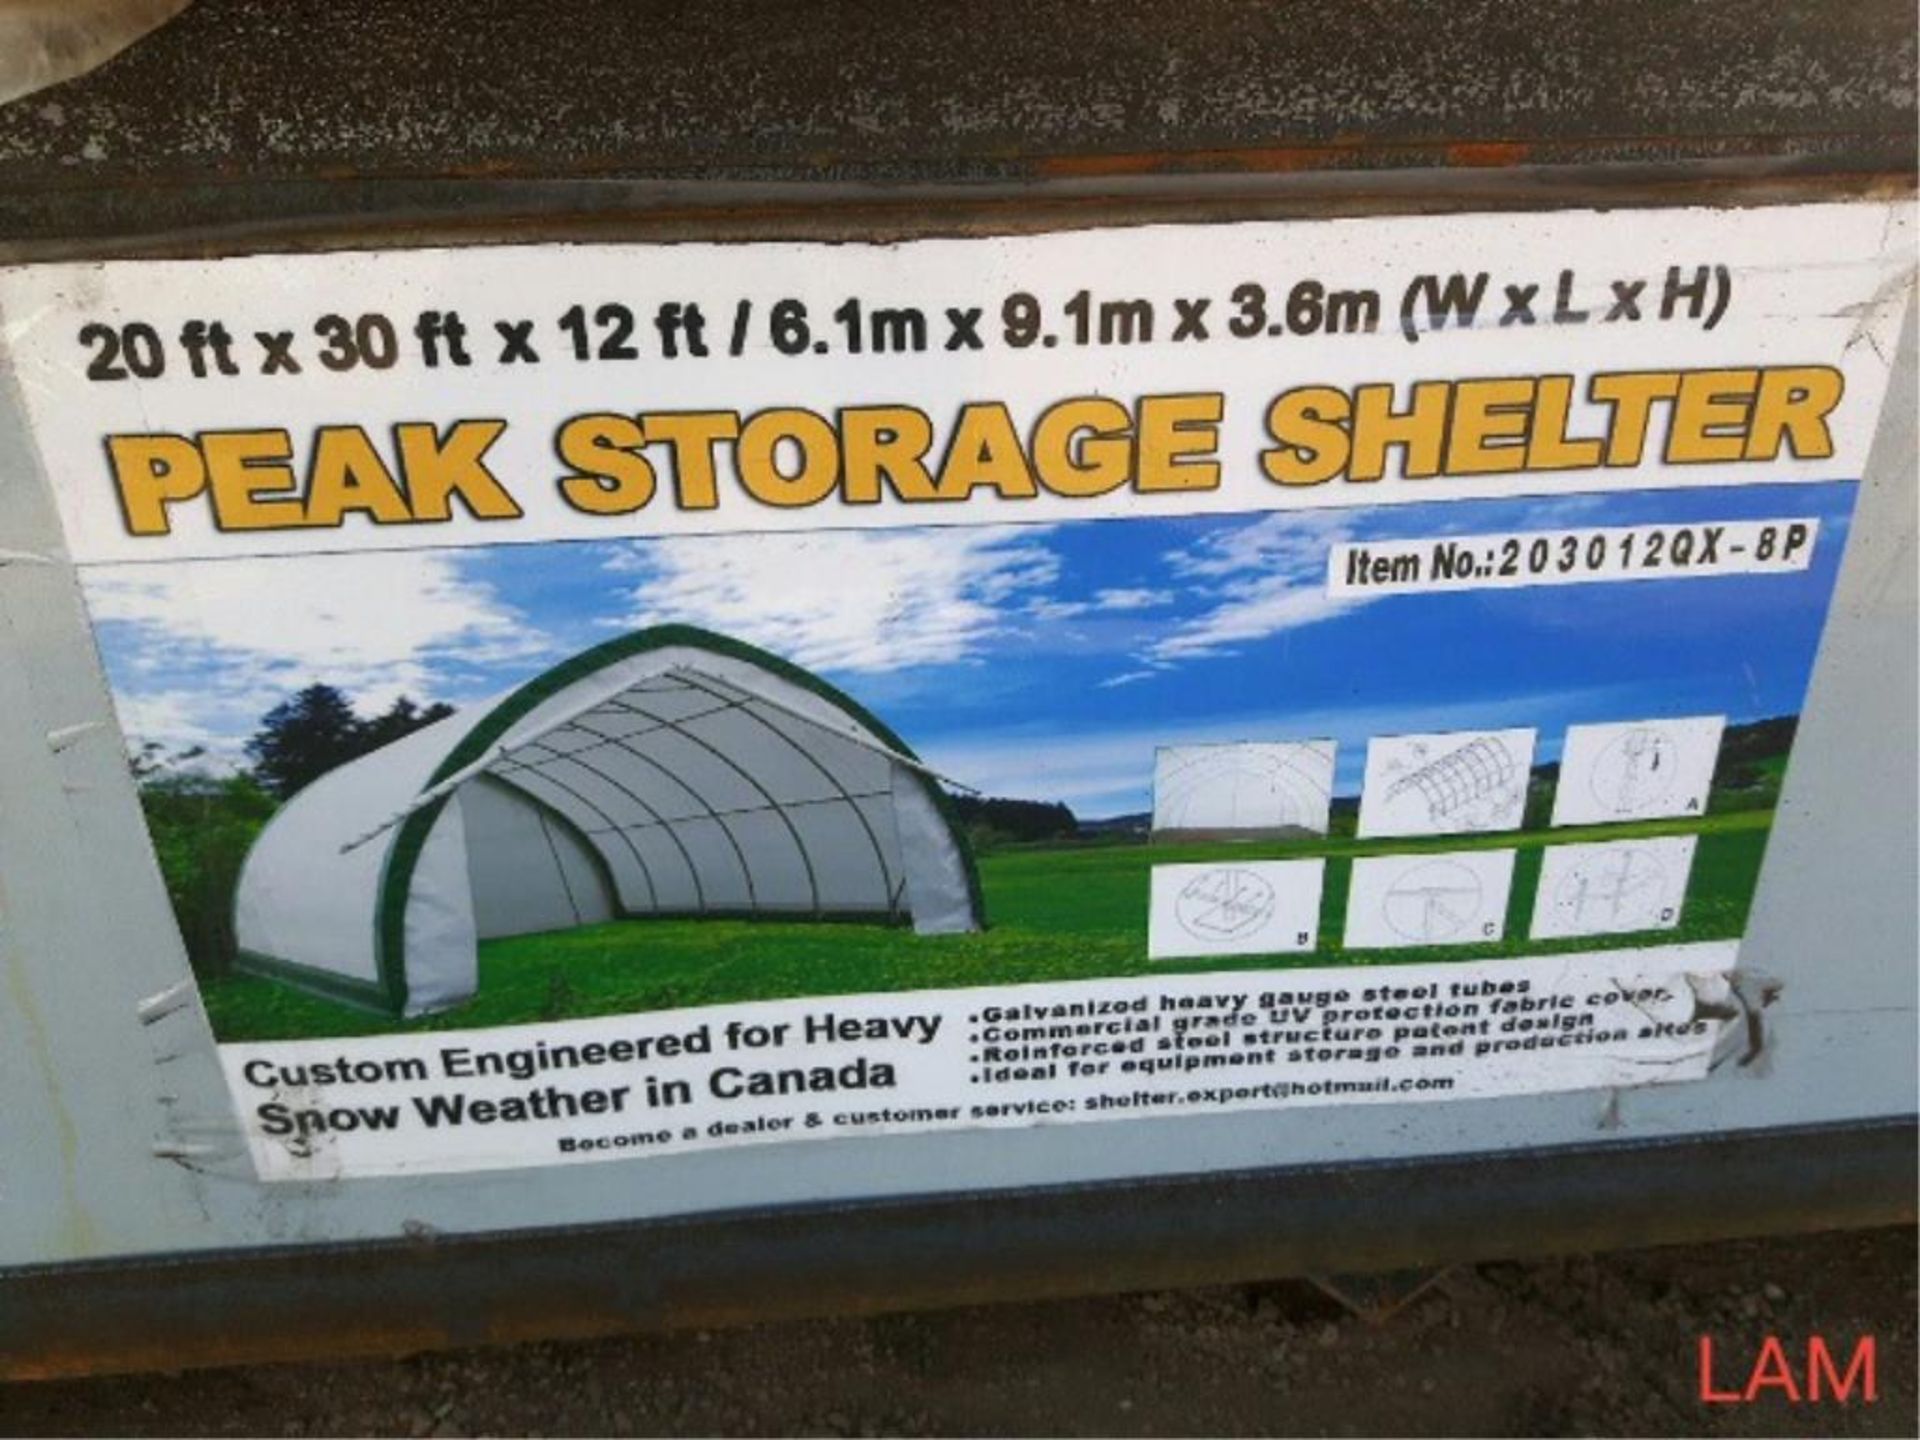 20FT X 30FT X 12FT Peak Ceiling Storage Shelter C/W: Commercial fabric, roll up door